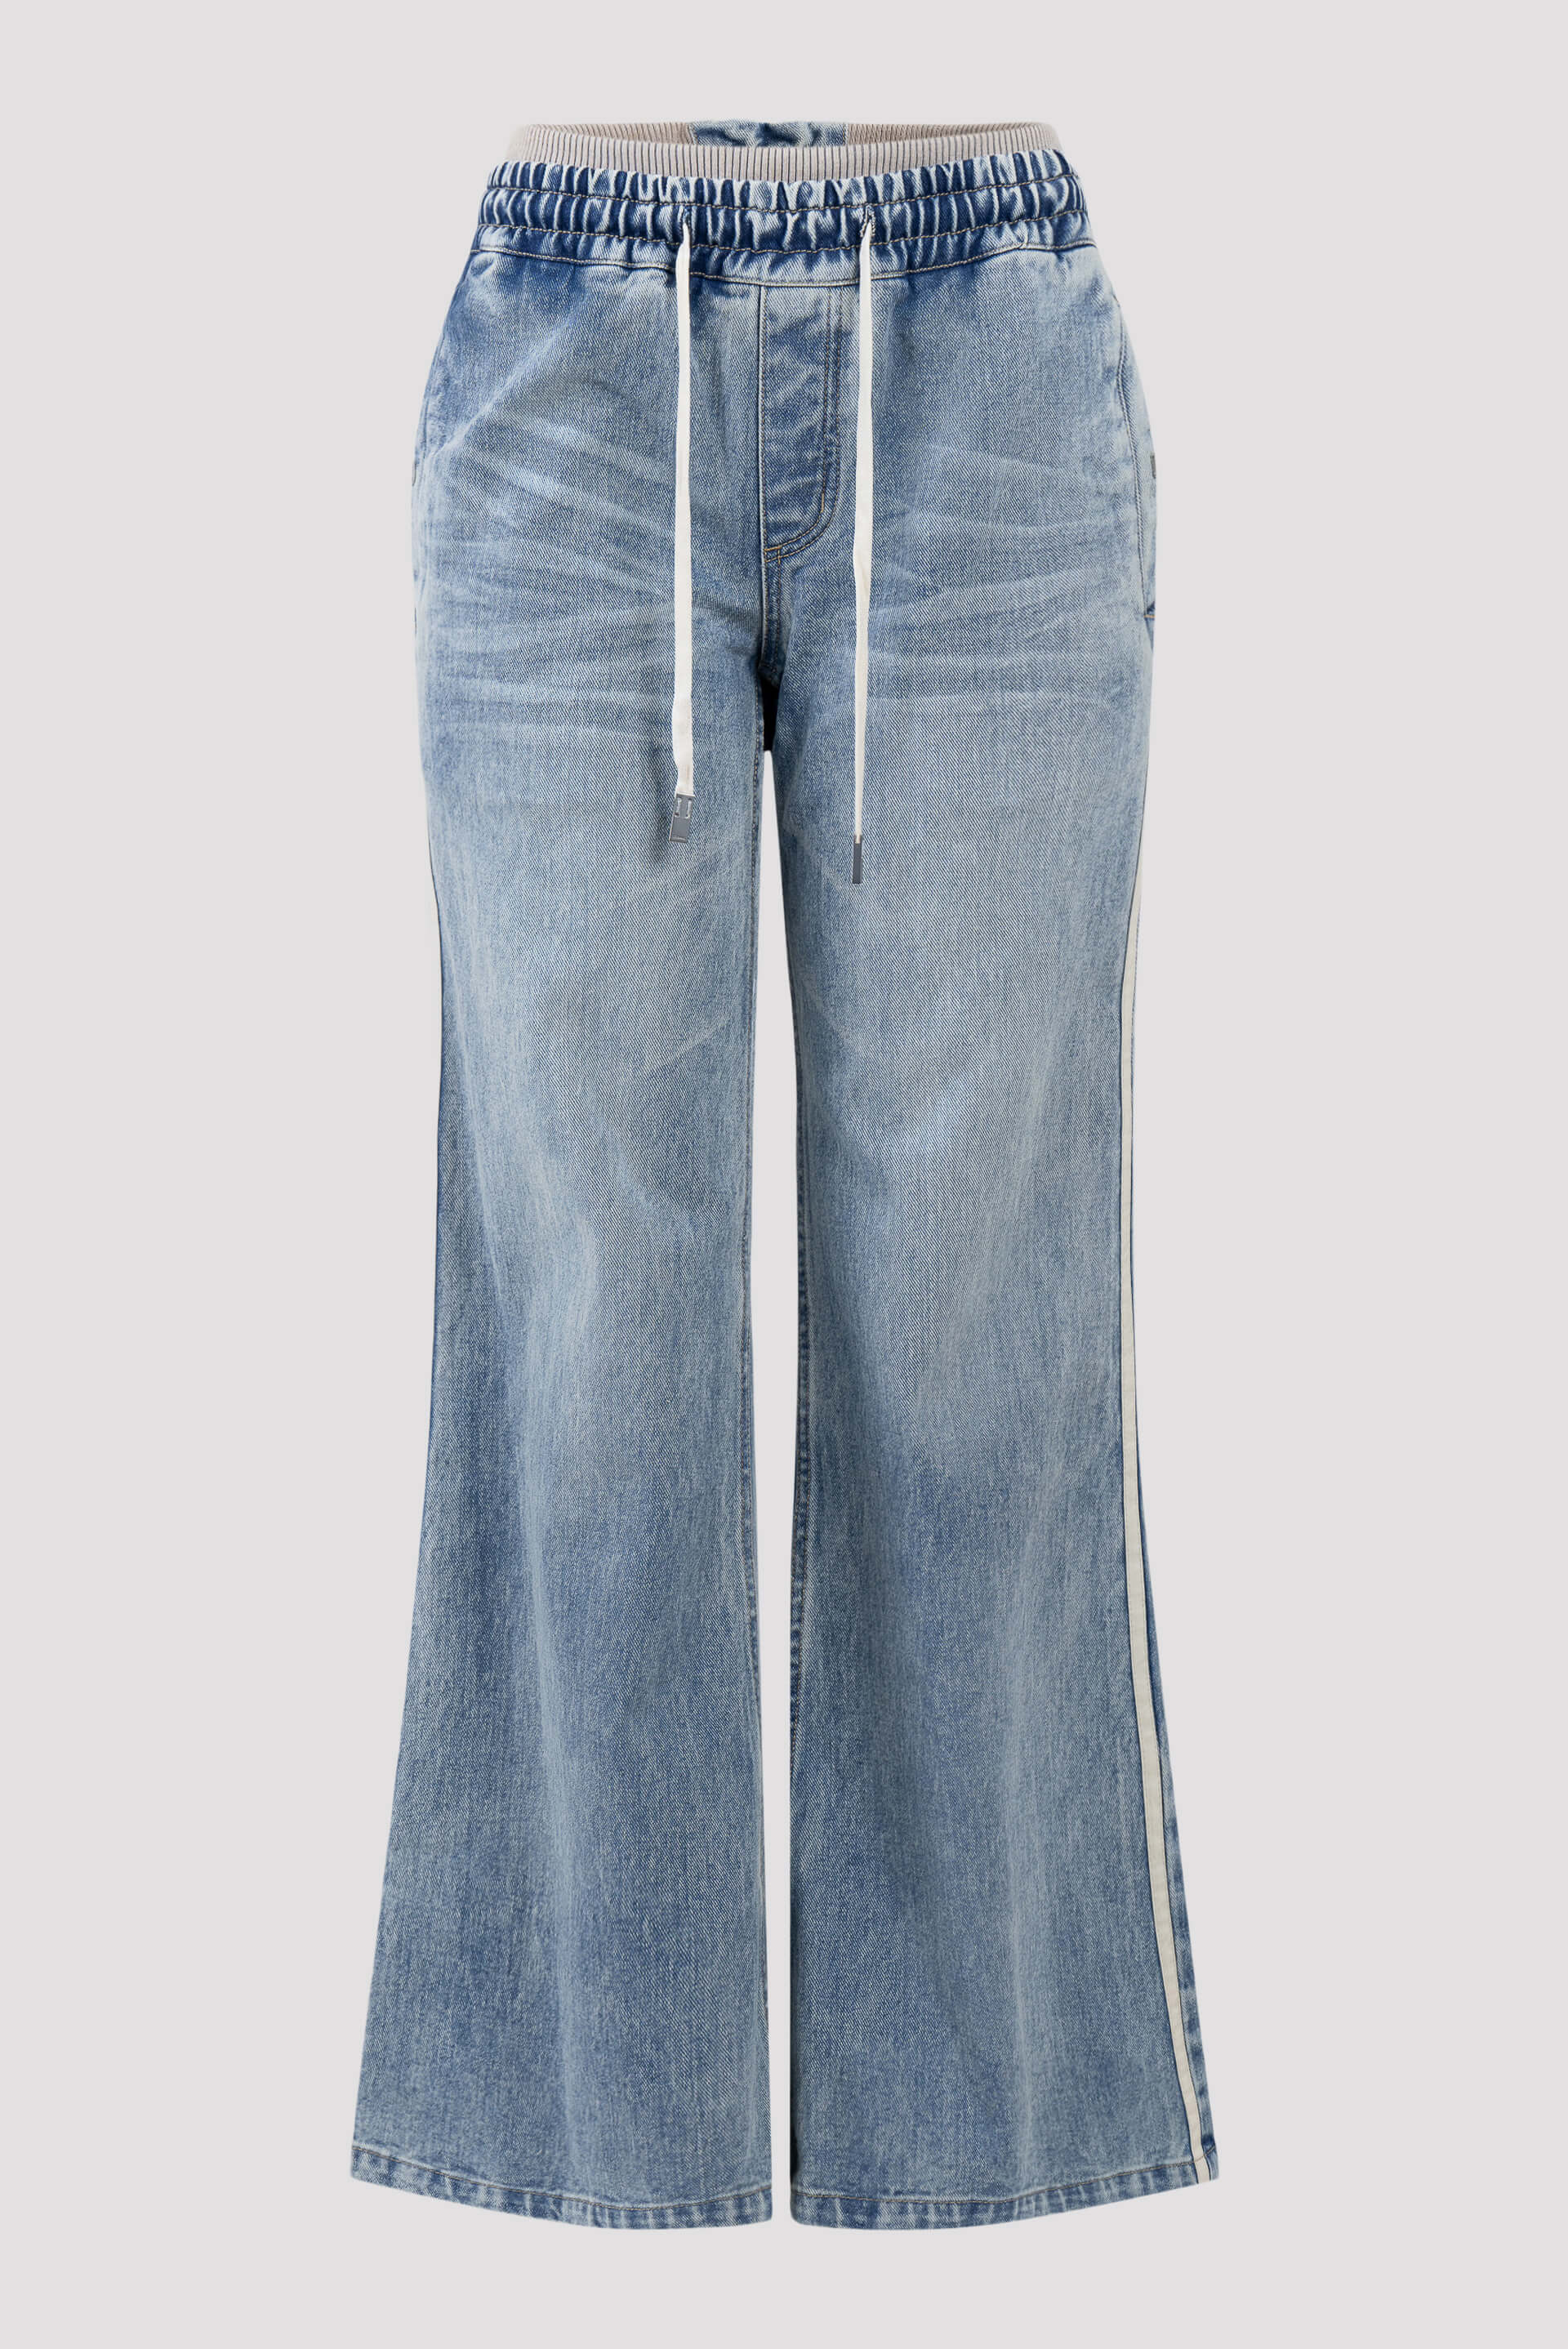 erosion detail bytte rundt C2h4 “Profile” Volume Double Waist Jeans - Fabric of Society